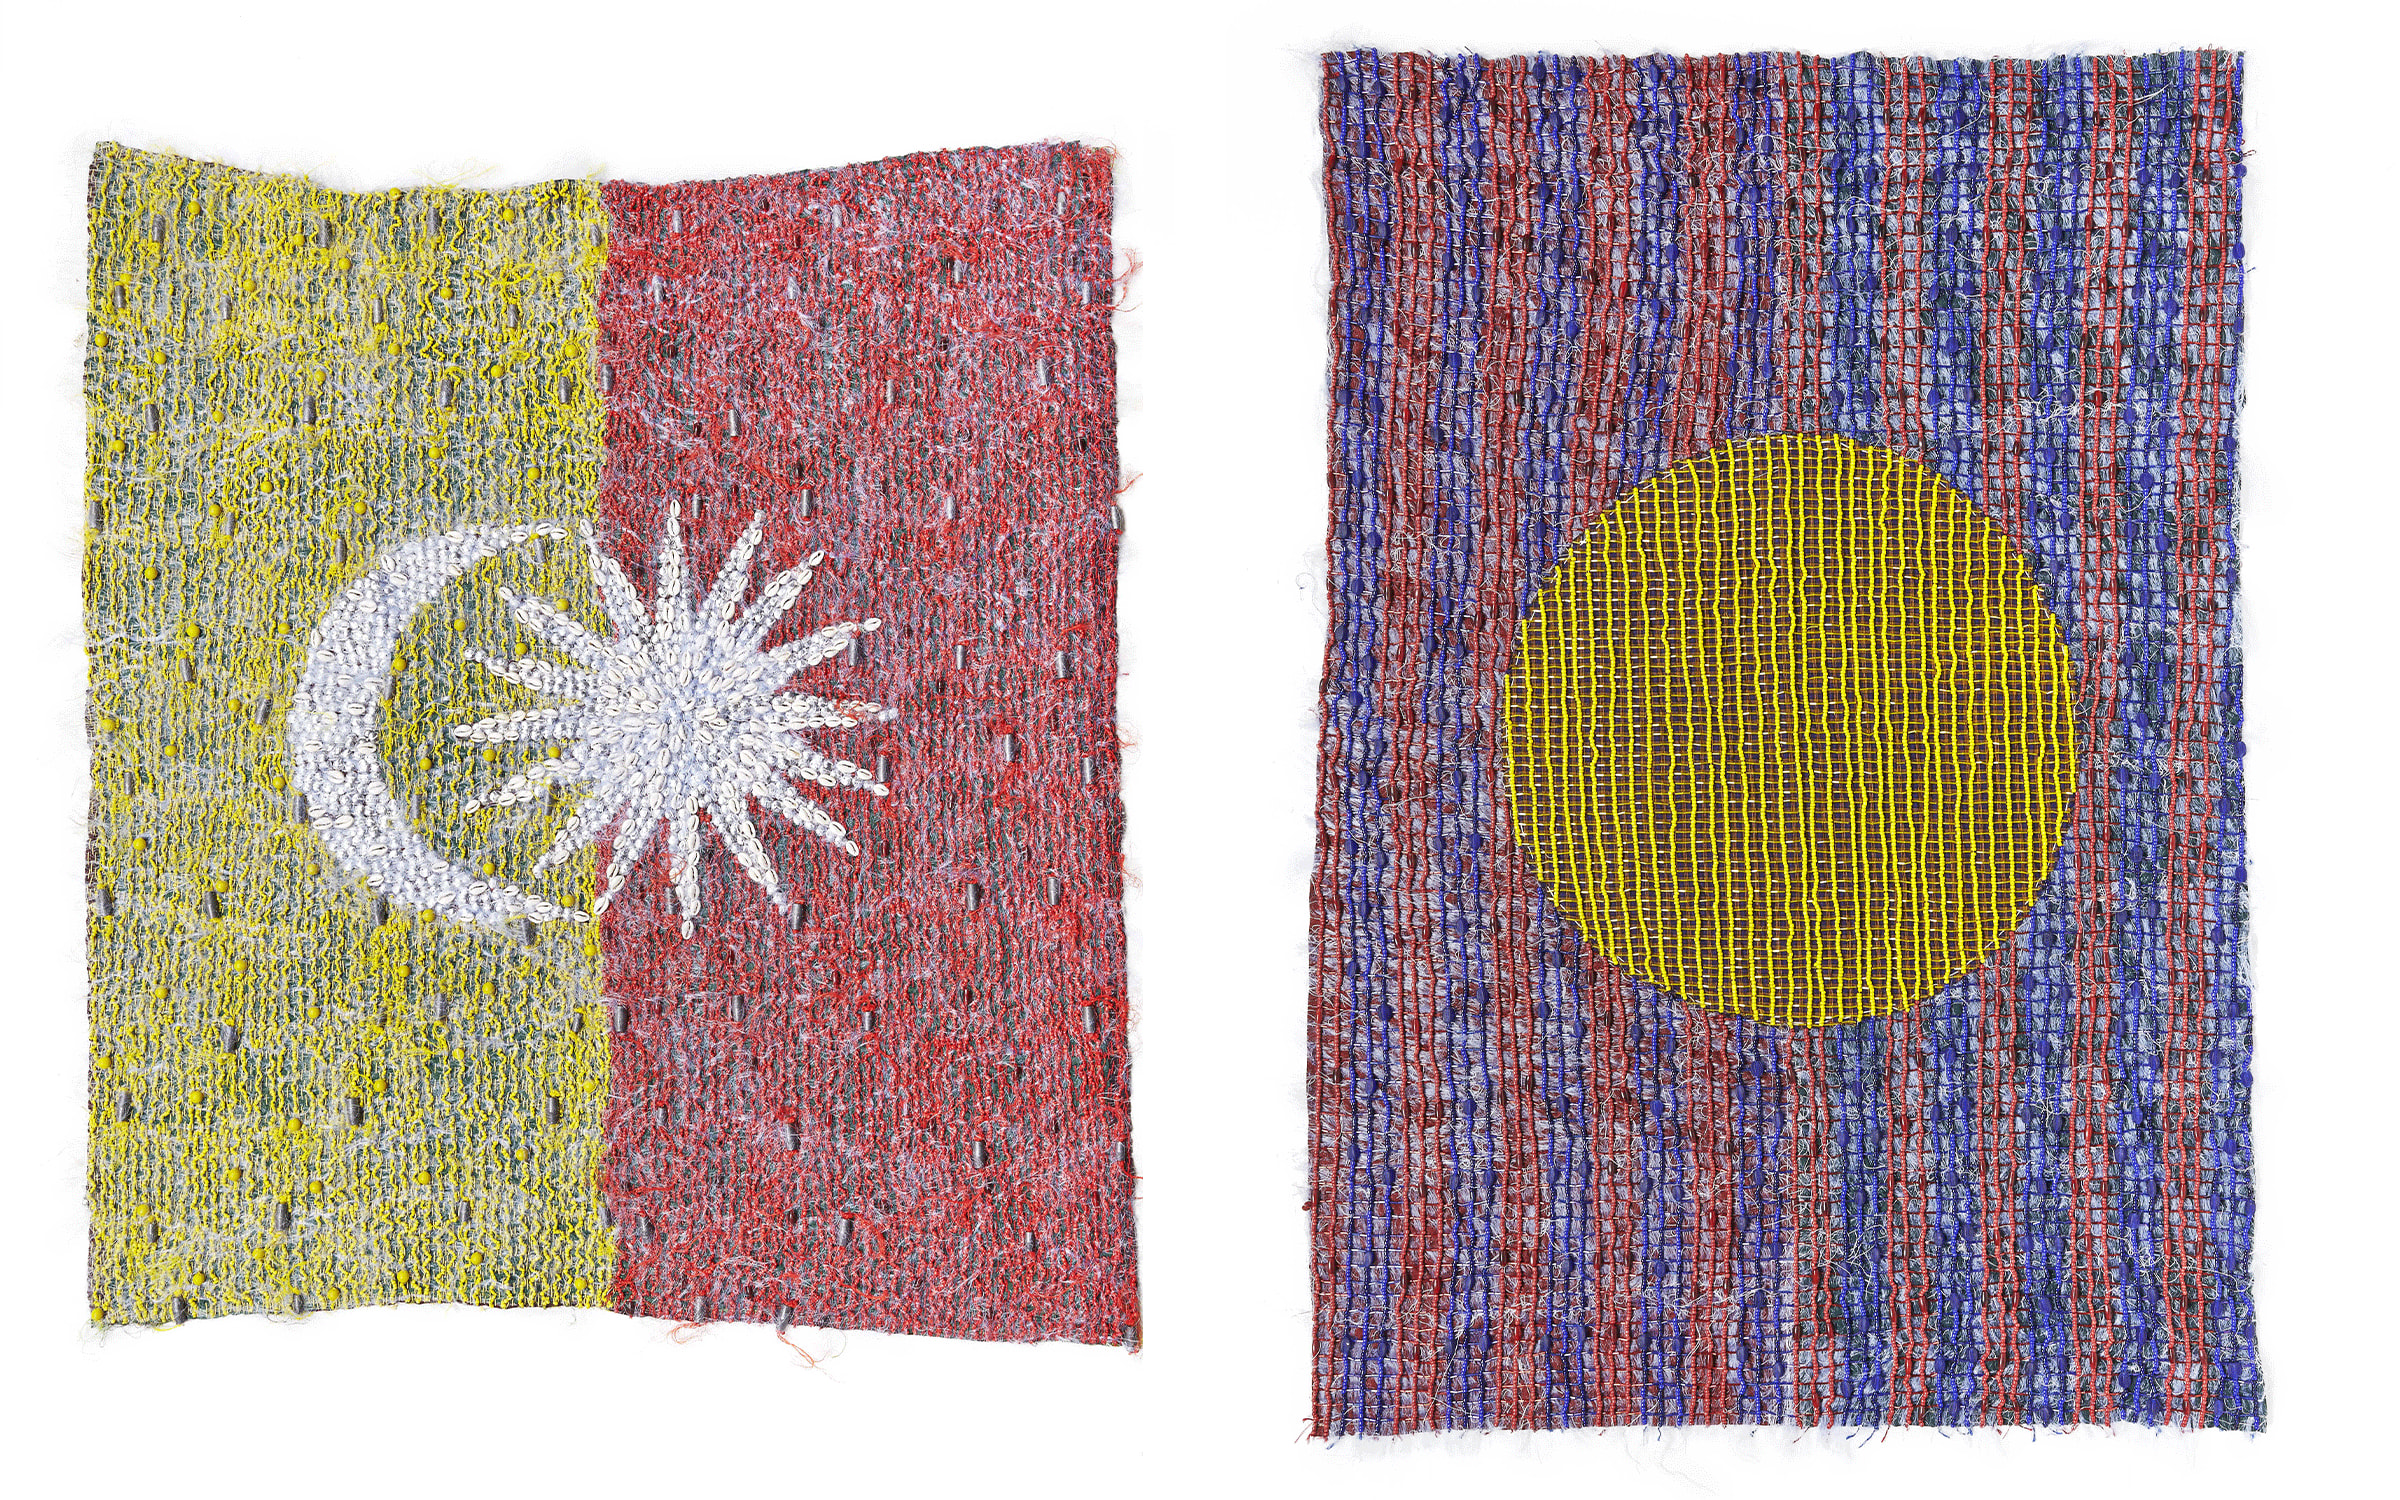 Left and right: Jakkai Siributr, The Outlaw’s Flag (details), 2017. Courtesy of the artist and Flowers Gallery.